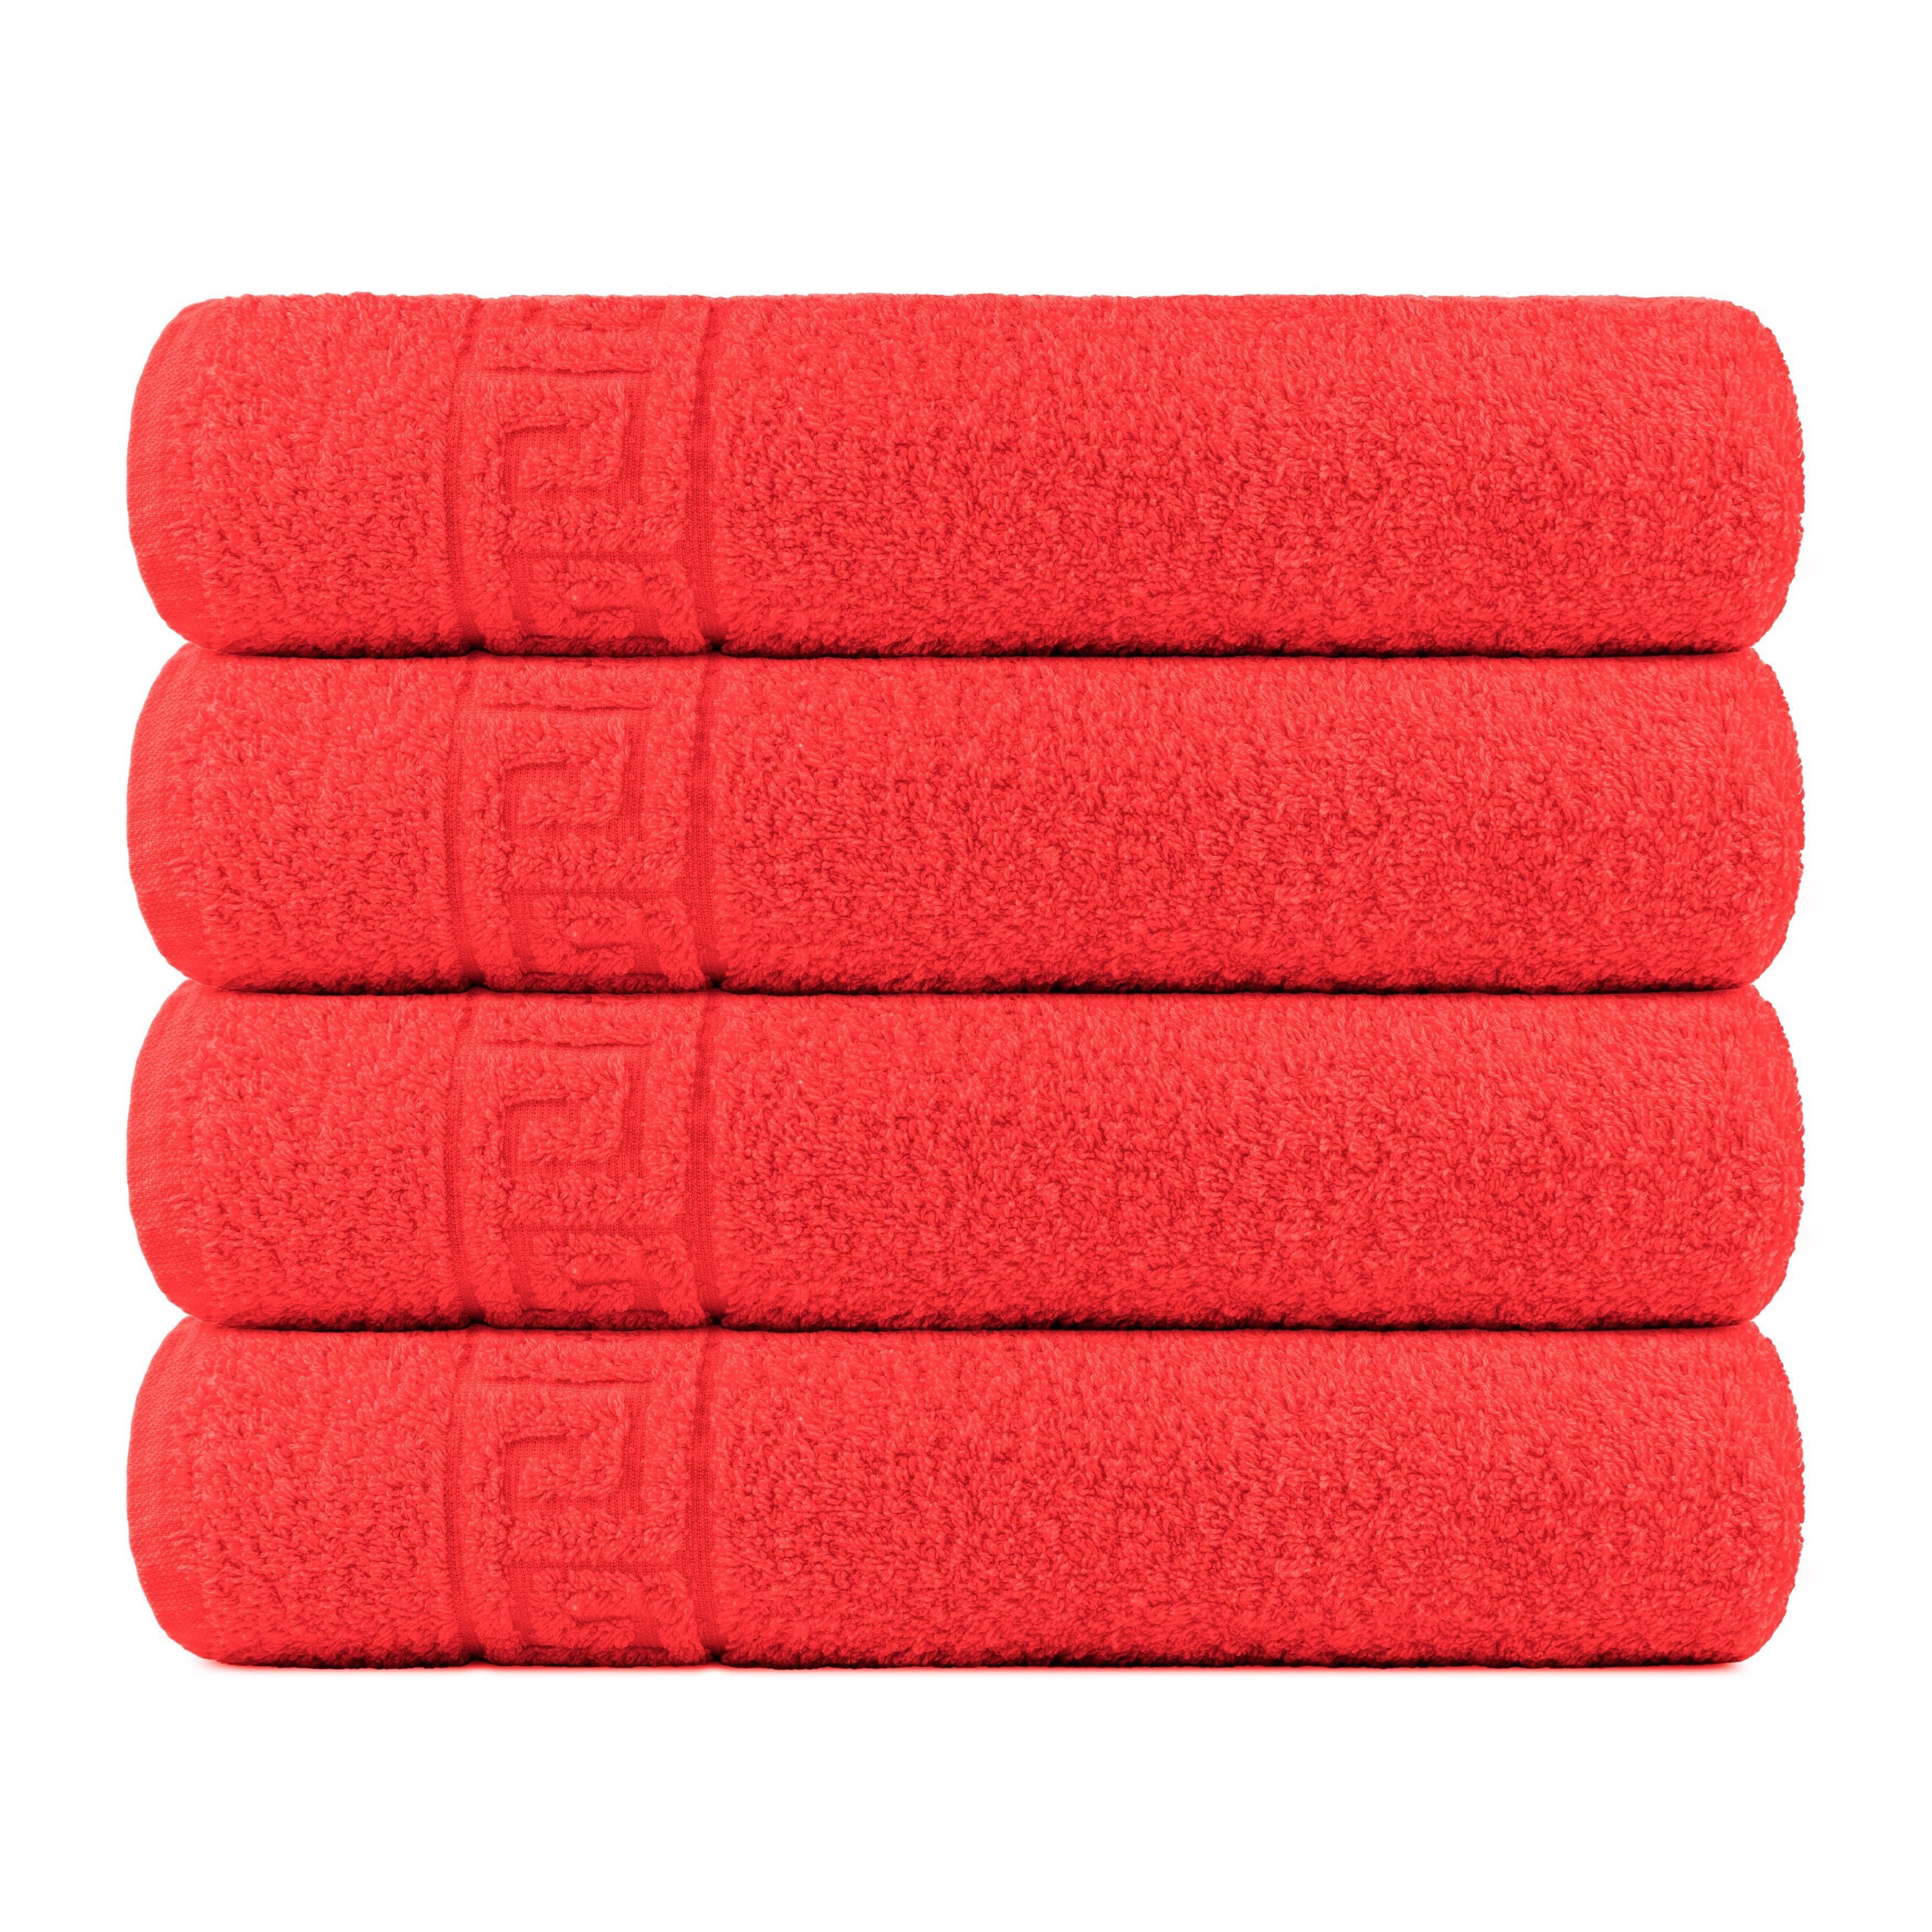 4 Piece 100% Cotton Hand/Bath Towel with Color Options - Context USA - Towel by Context